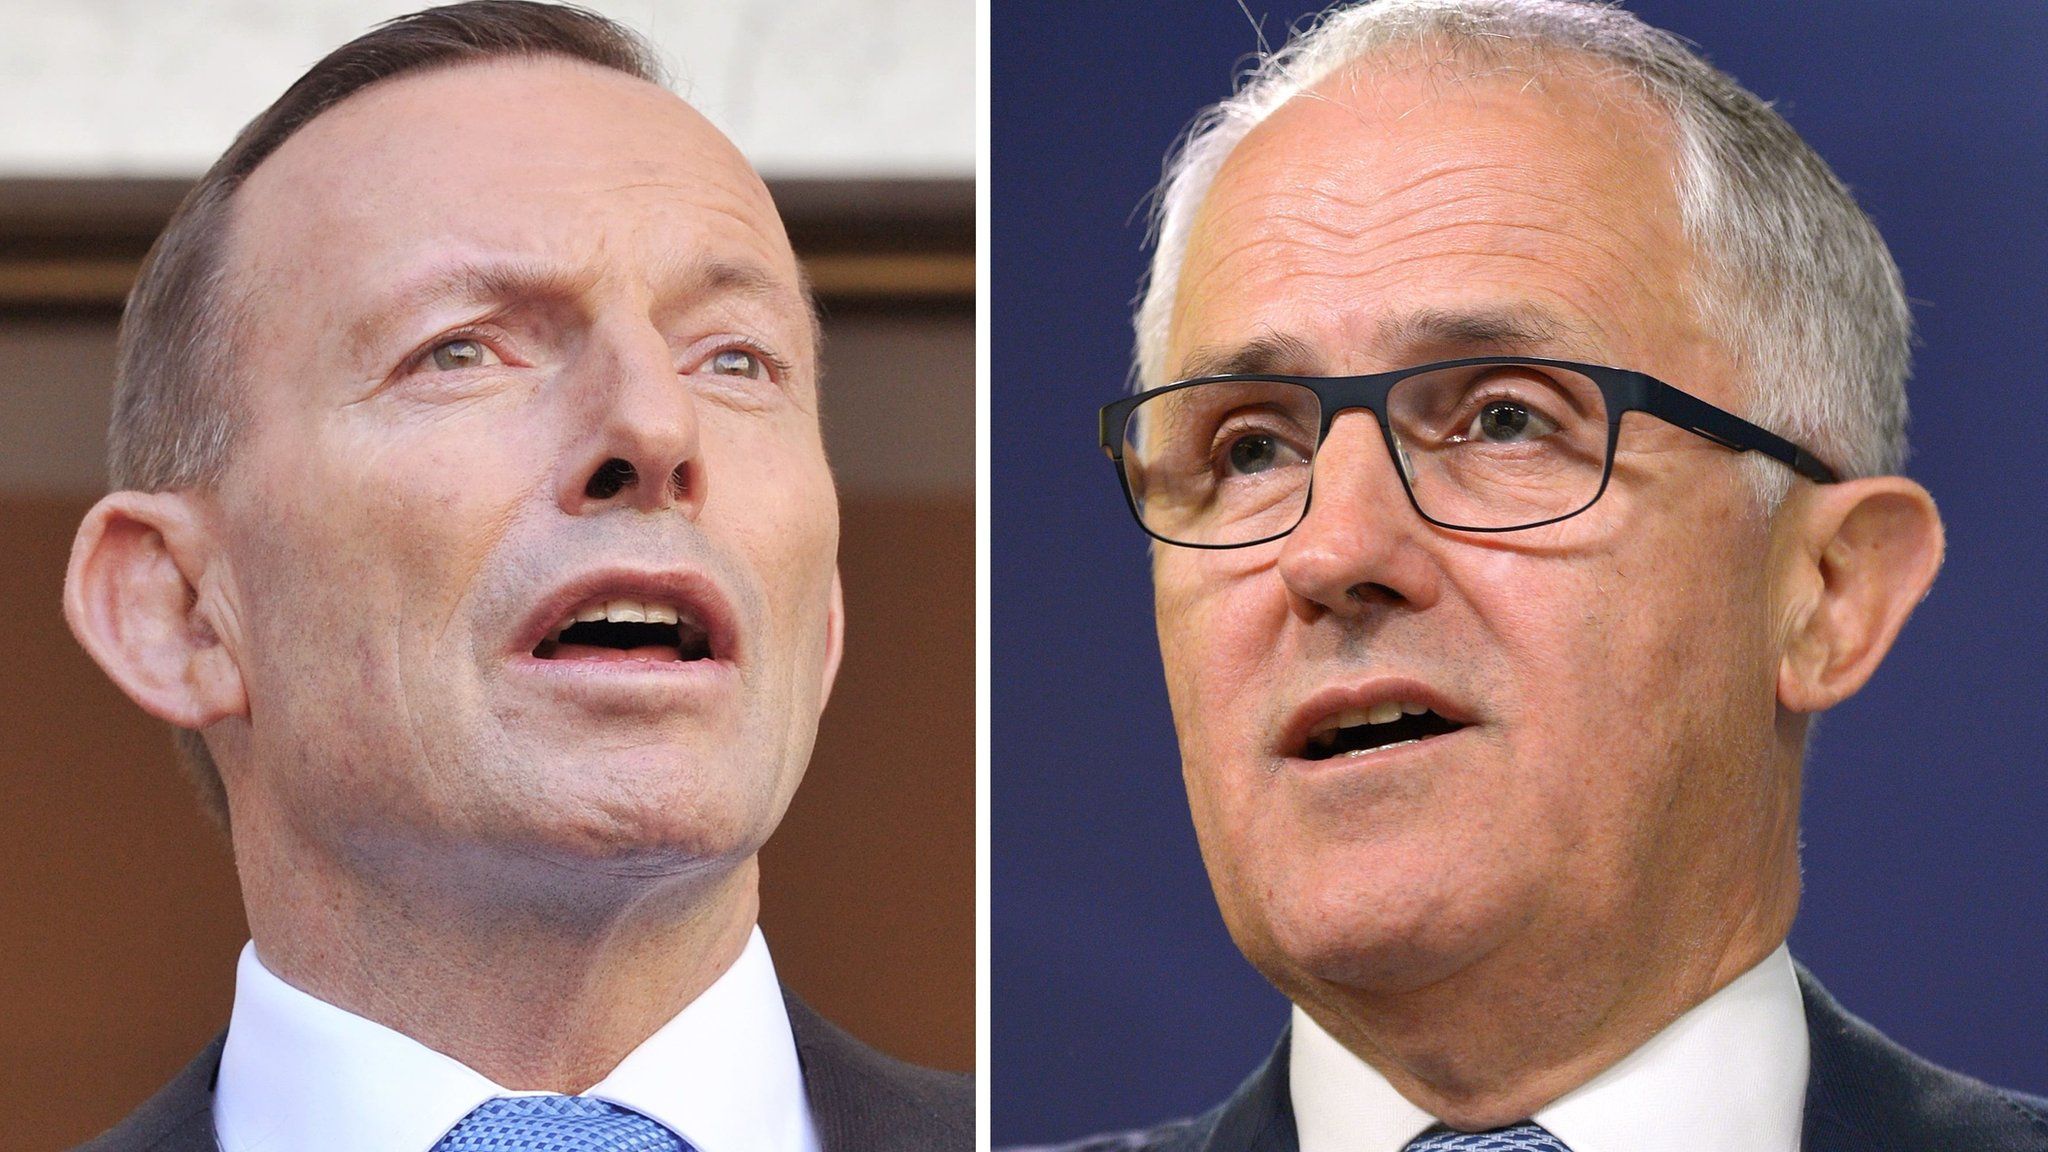 This combo of file photos shows Australia"s Communications Minister Malcolm Turnbull (R) speaking at a press conference in Sydney September 24, 2013 and Australian Prime Minister Tony Abbott (L) speaking to the media during a press conference at Parliament House in Canberra on September 9, 2015